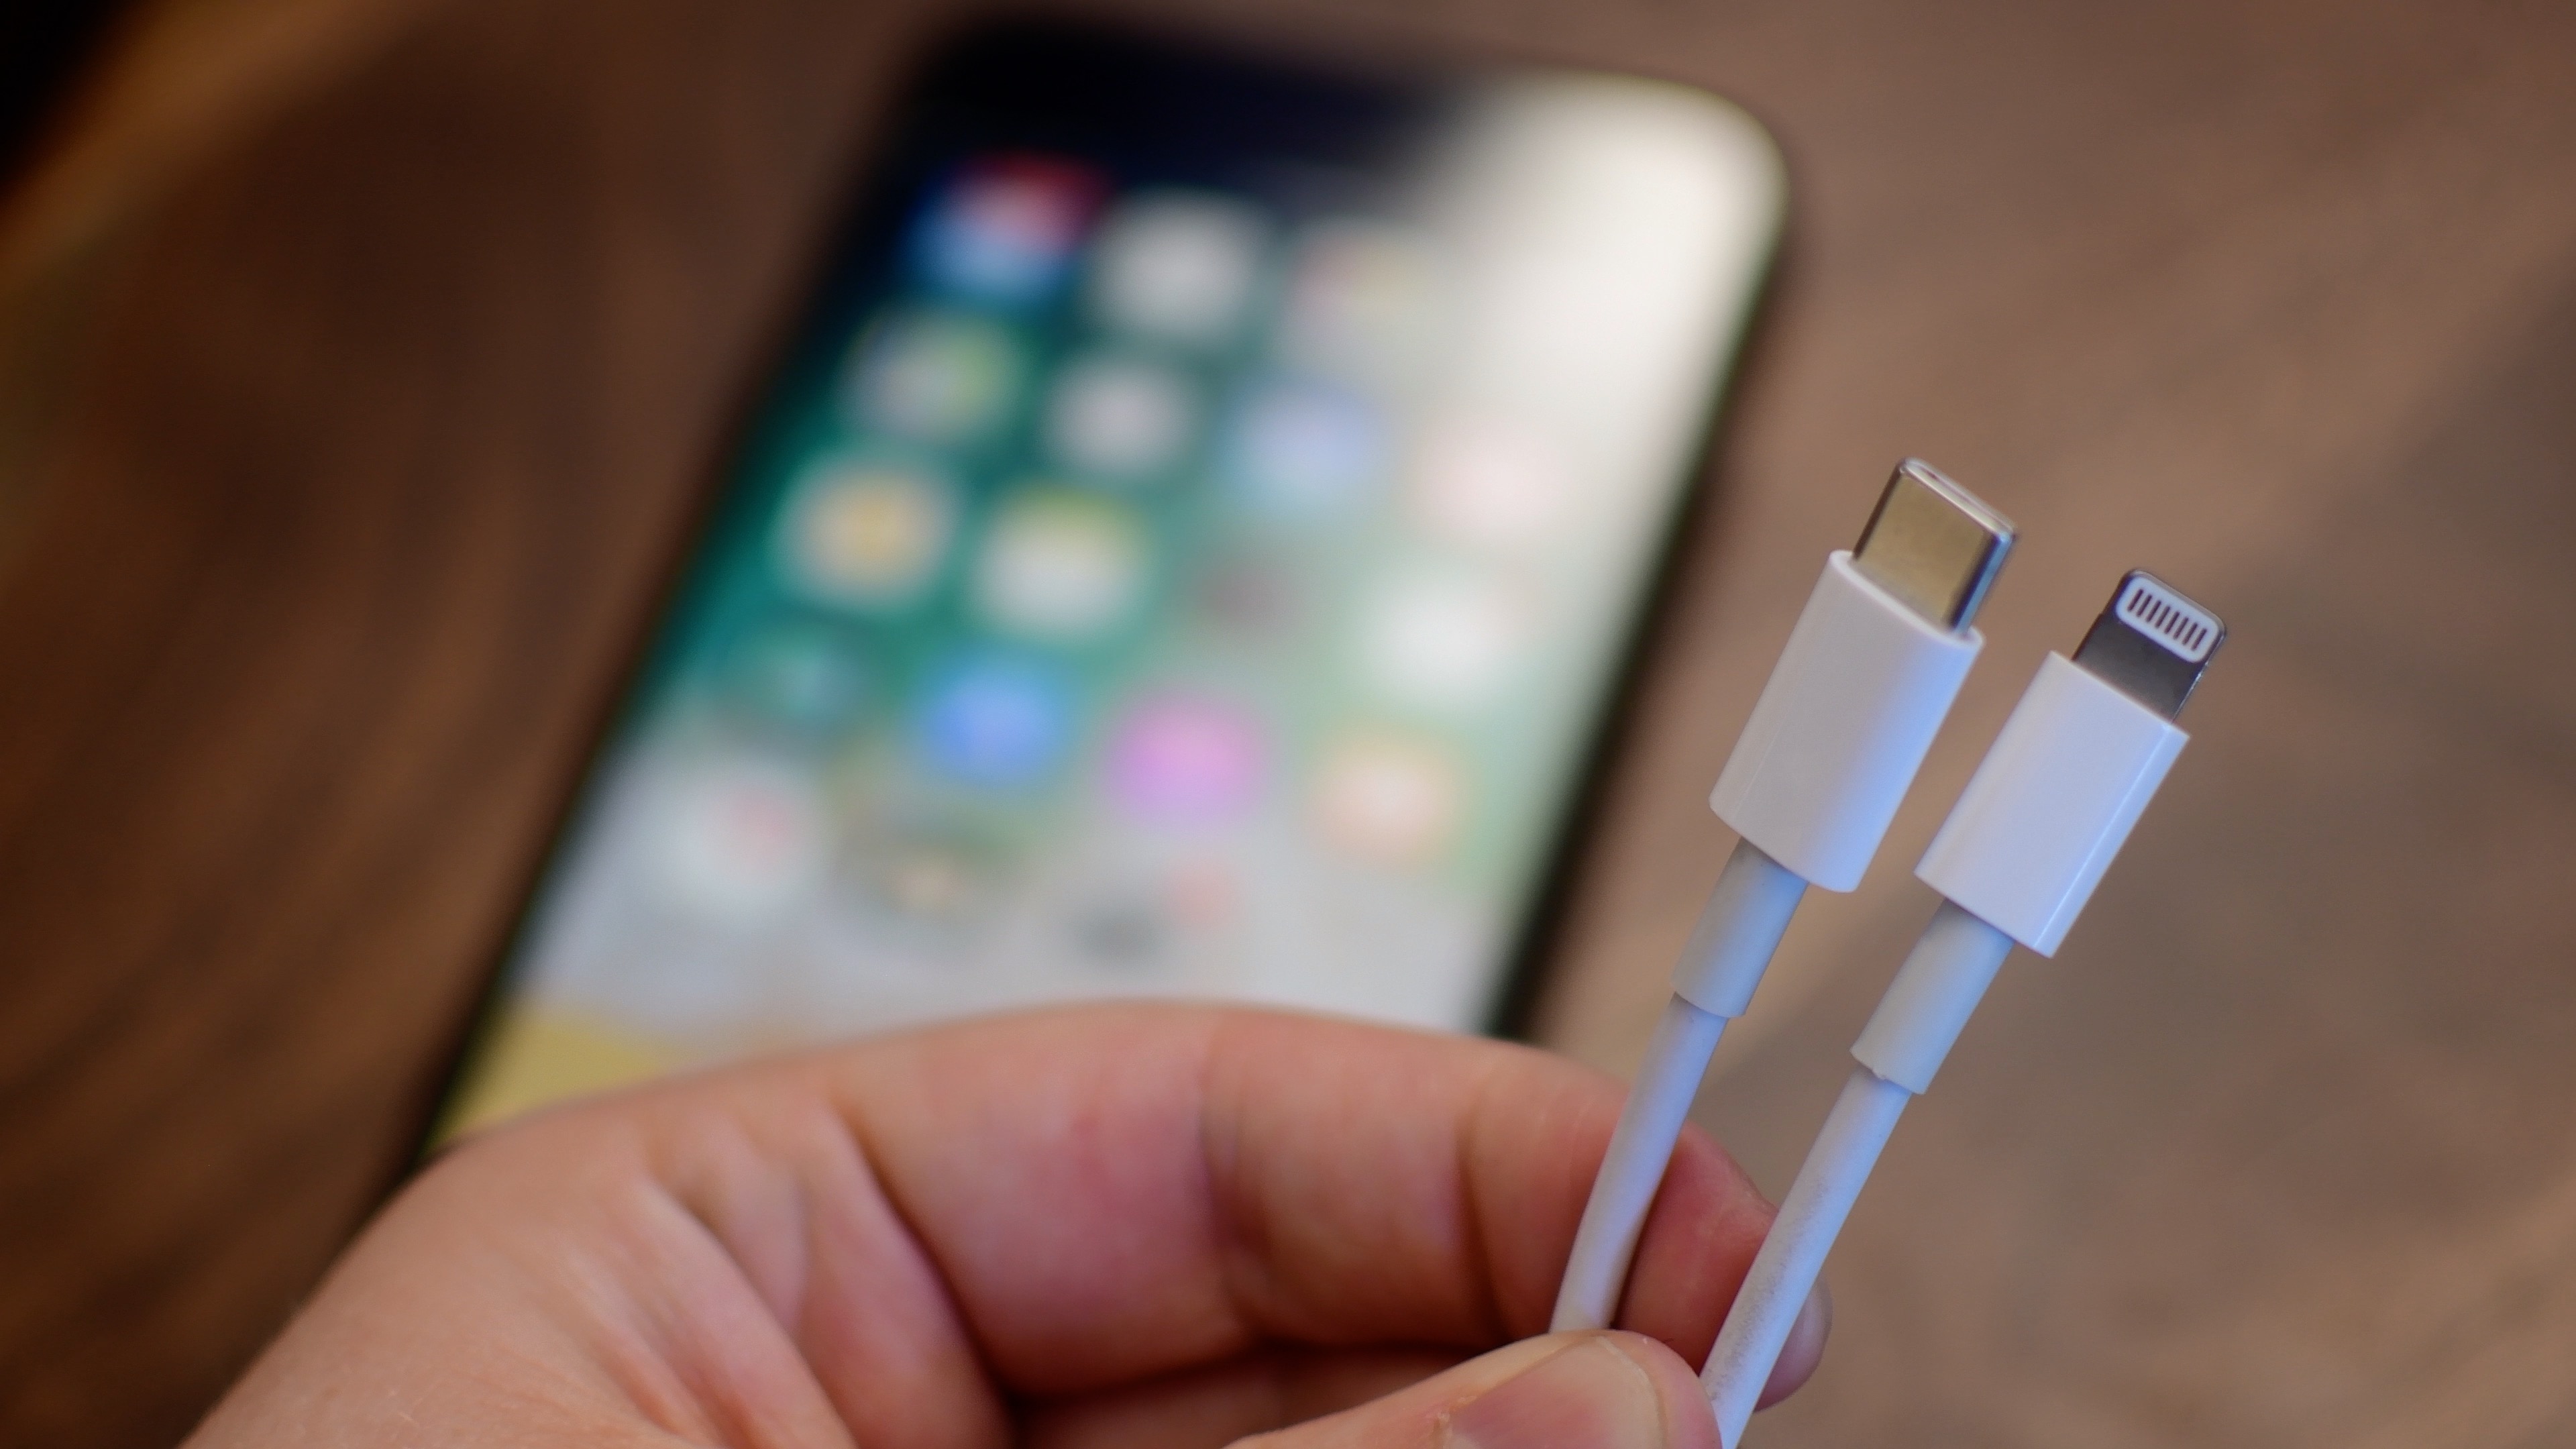 A photograph focused on a male hand holding both ends of Apple's Lightning to USB-C cable in the foreground, with an iPhone laid on a table blurred out in the background.